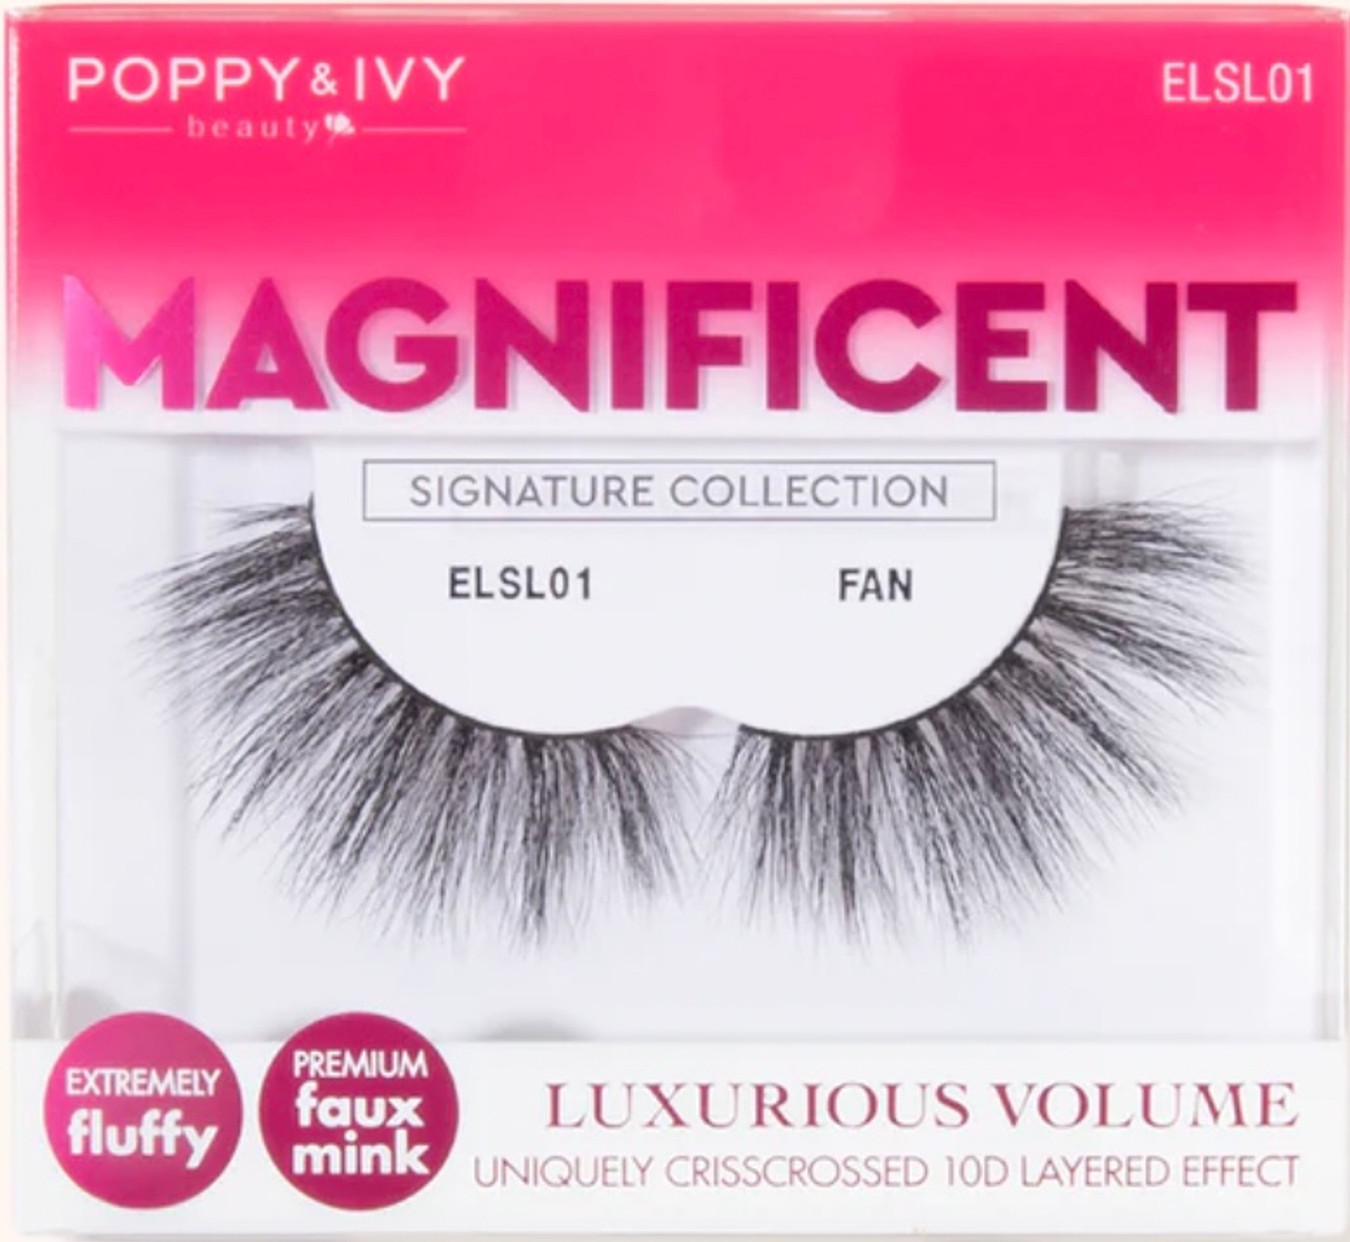 ABSOLUTE Poppy & Ivy Magnificent 10D Lash